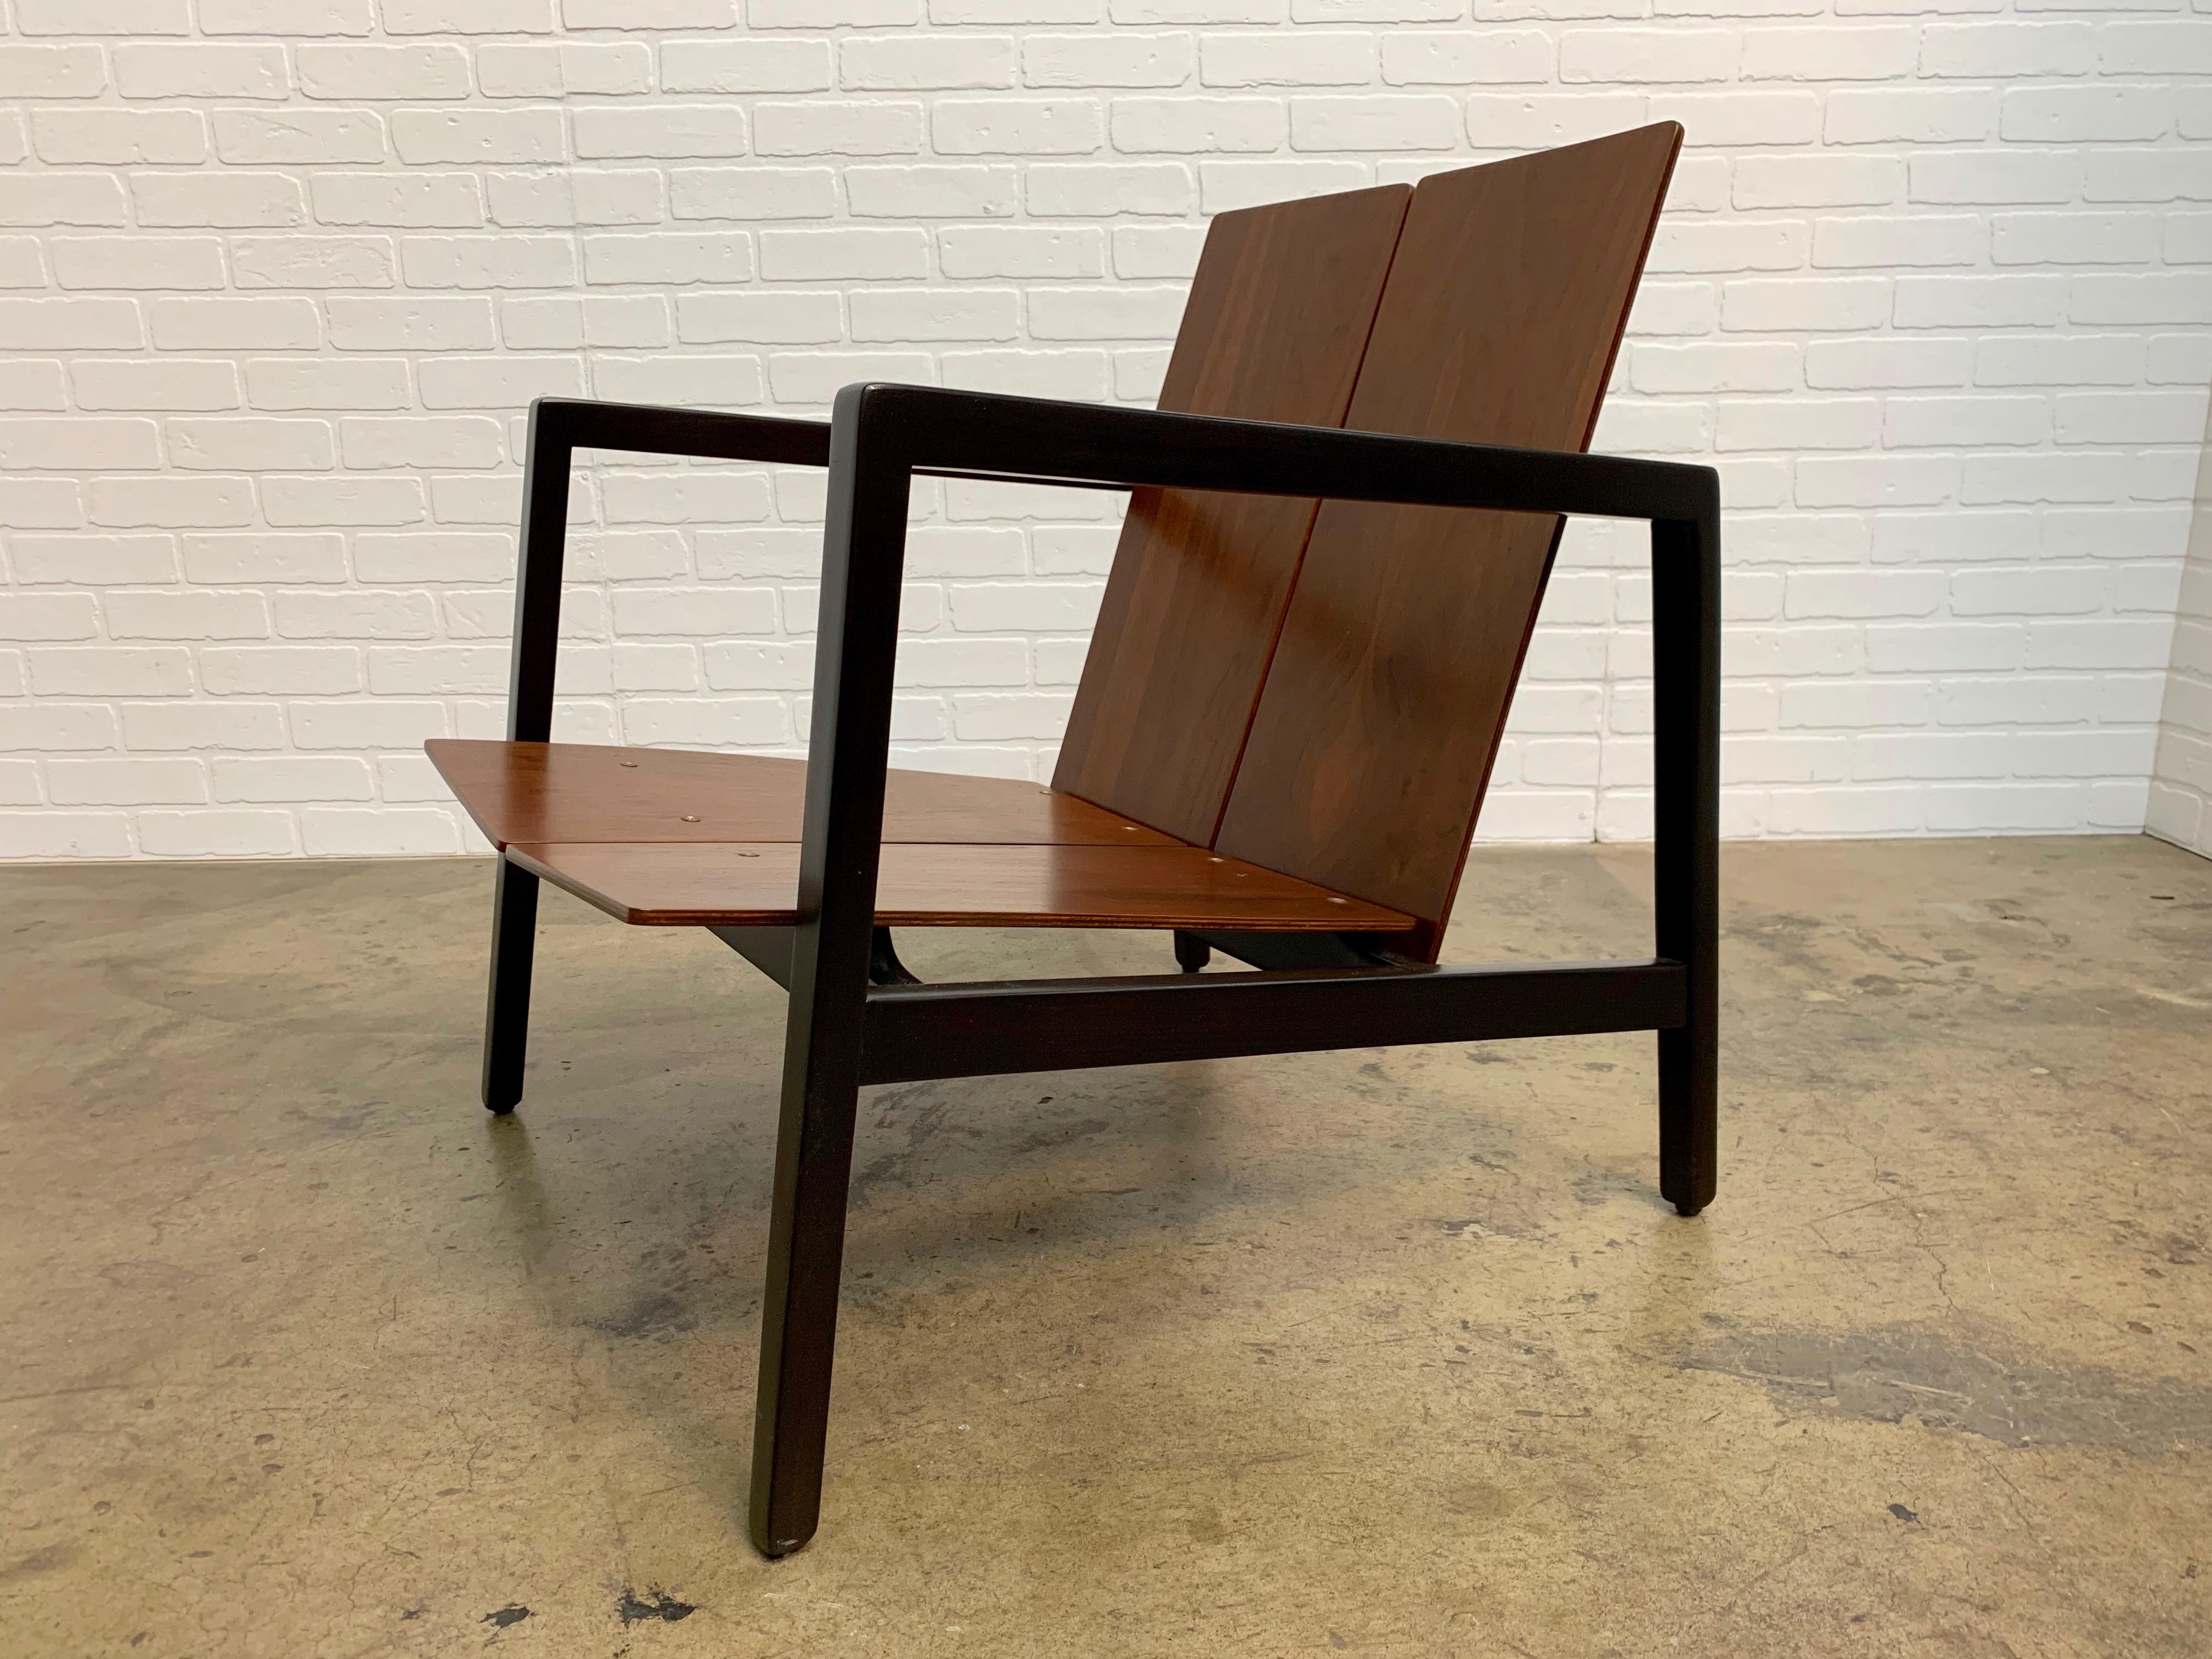 20th Century Lewis Butler Model 645 Lounge Chair for Knoll